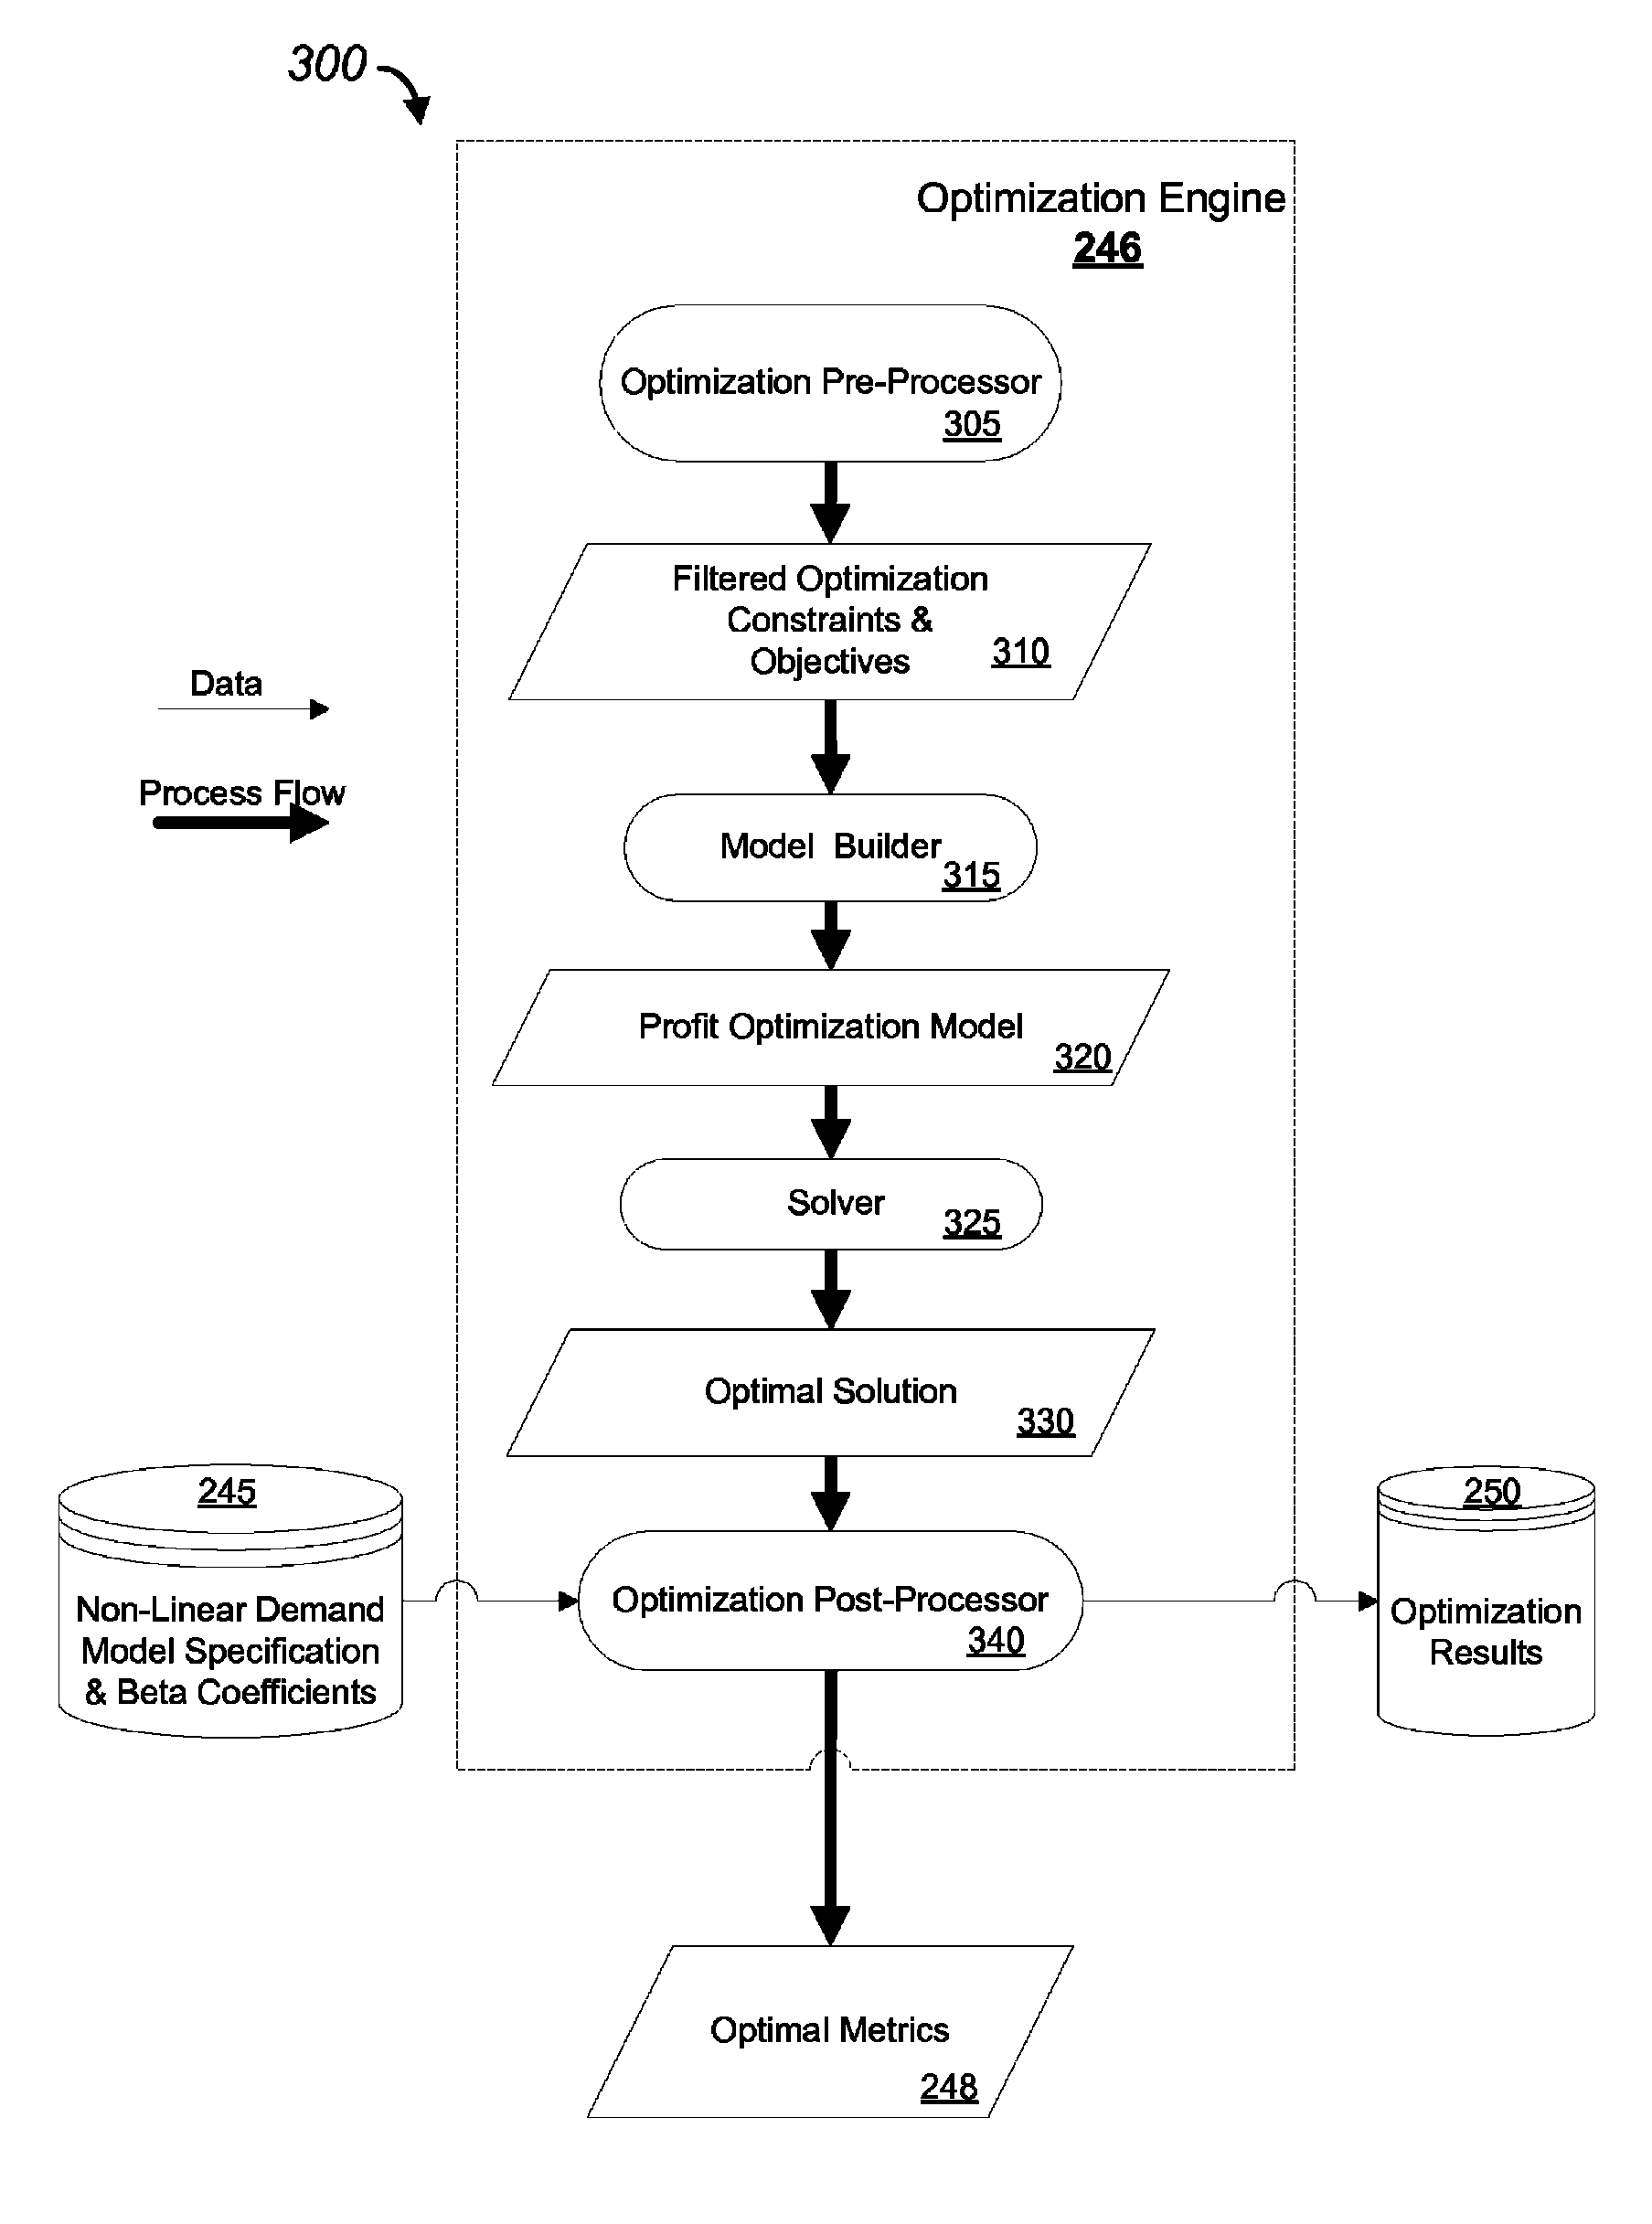 System and method for simultaneous price optimization and asset allocation to maximize manufacturing profits